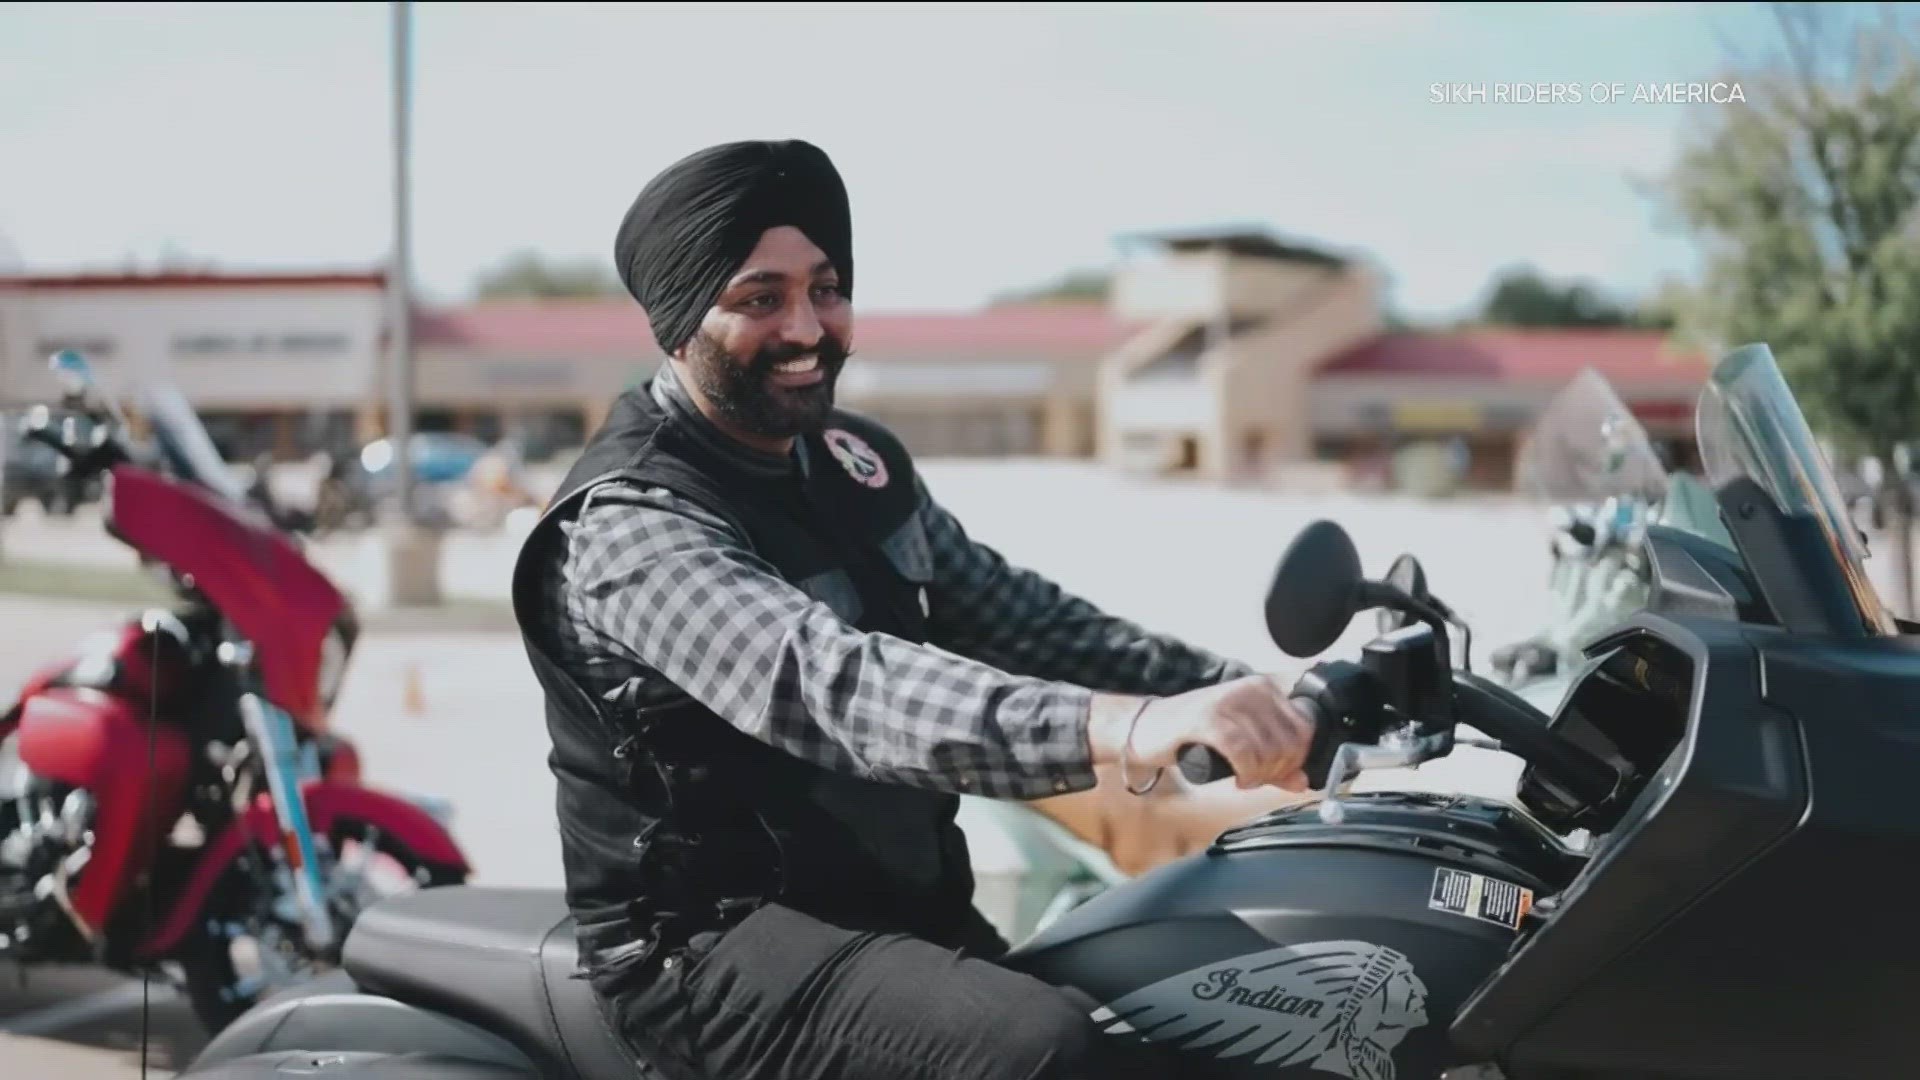 A bill could allow a religious exemption to California's motorcycle helmet law, specifically for Sikh riders who wear turbans.